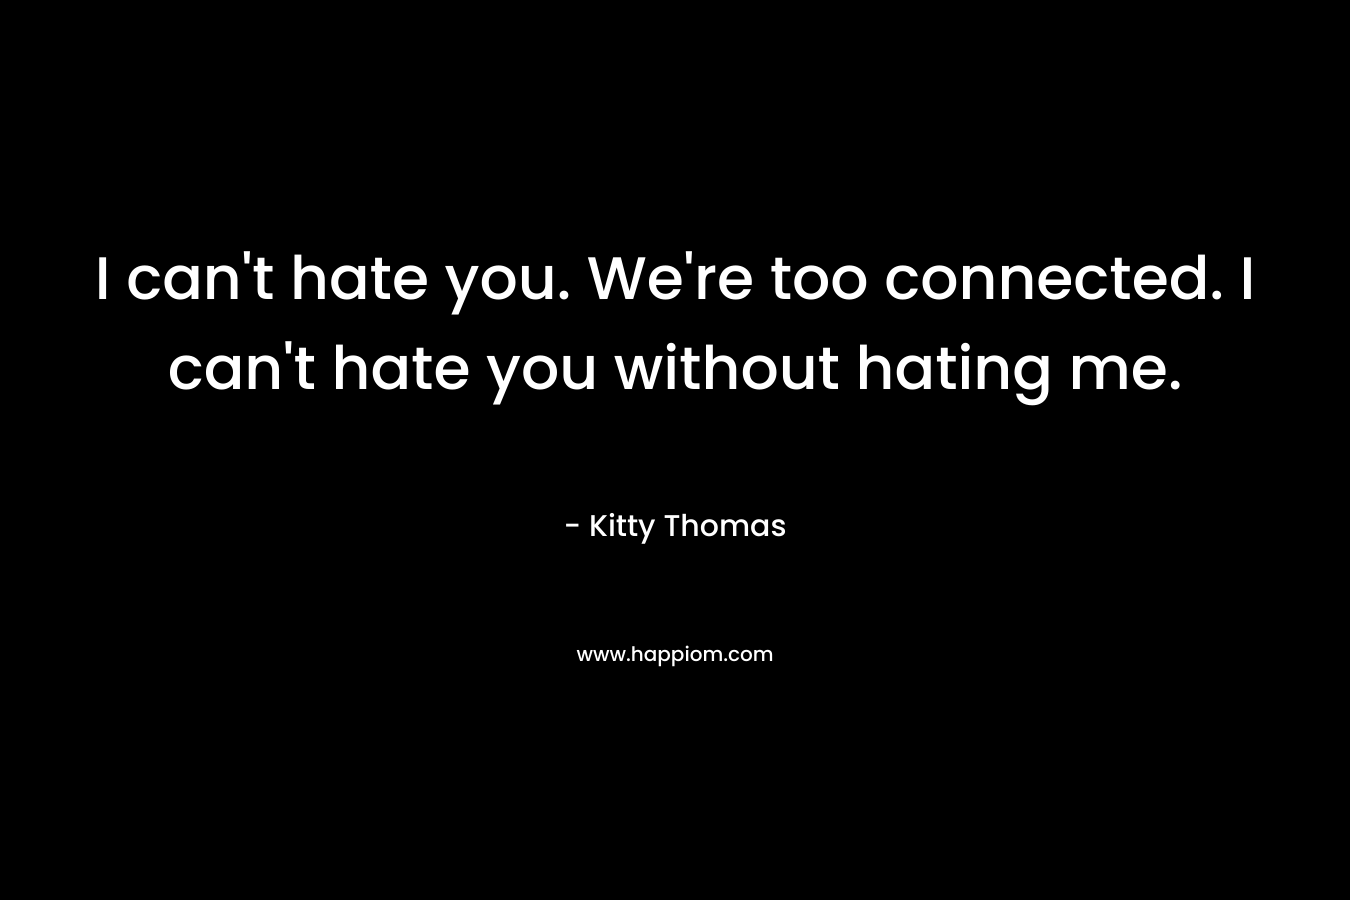 I can't hate you. We're too connected. I can't hate you without hating me.